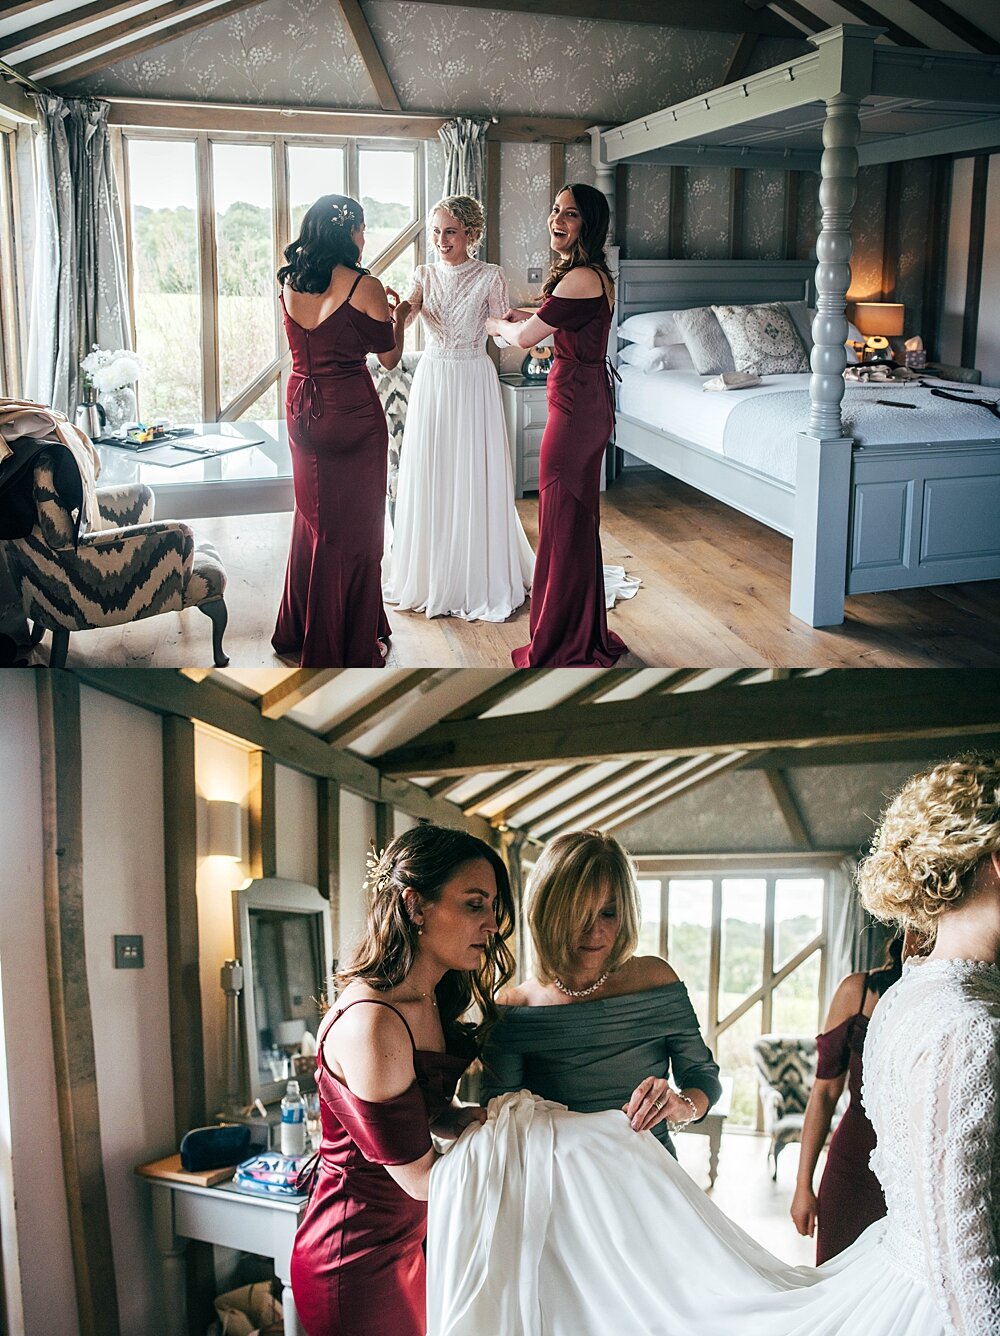 Autumn barn wedding at Crondon Park with rich reds and an ethereal Pronovias gown with Game of Throne vibes! Essex Documentary Wedding Photographer